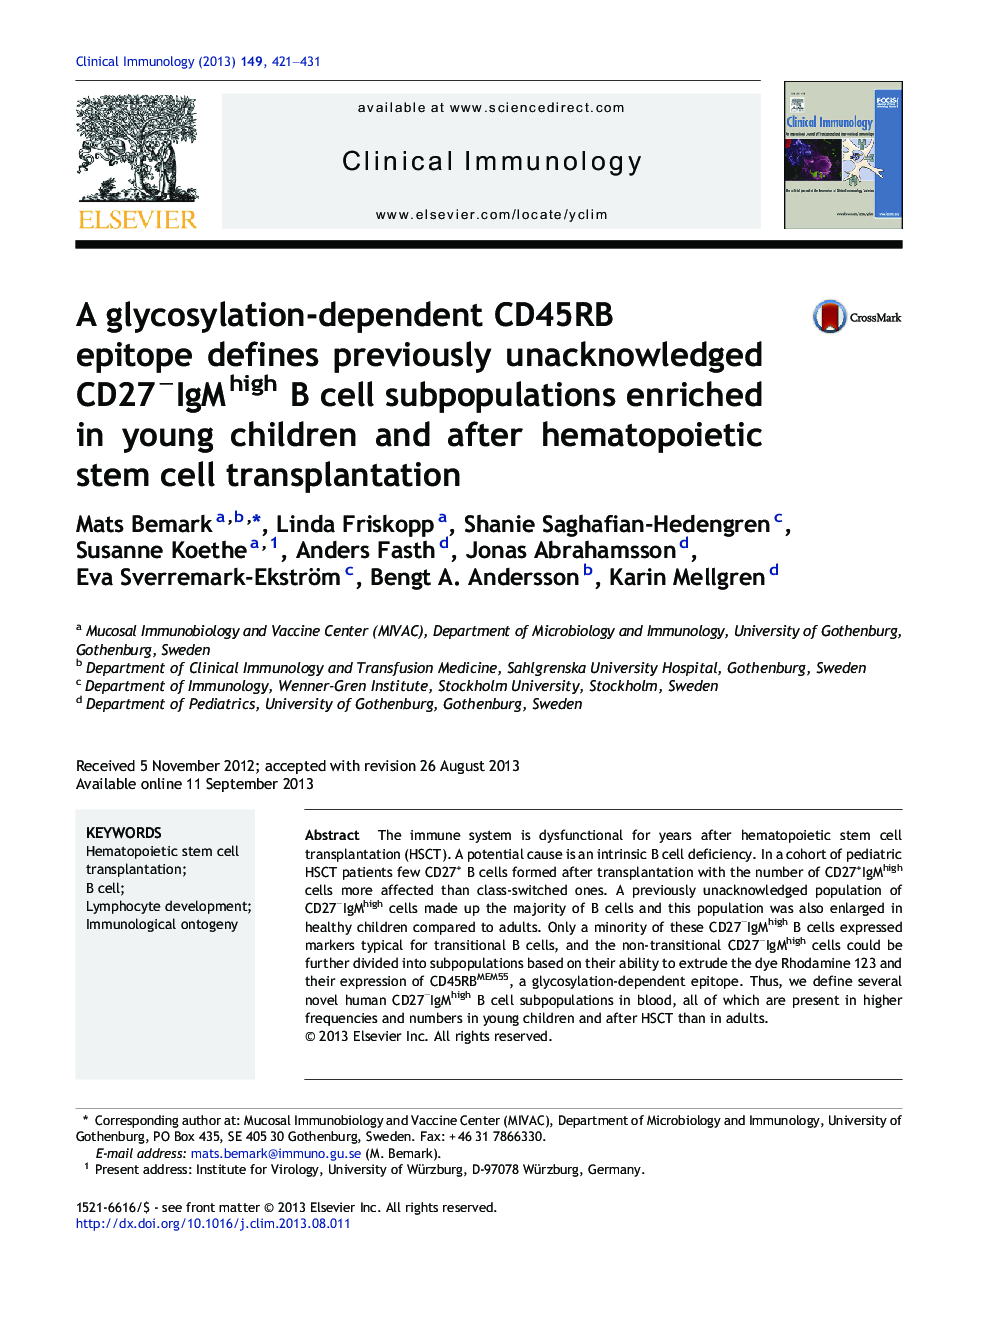 A glycosylation-dependent CD45RB epitope defines previously unacknowledged CD27âIgMhigh B cell subpopulations enriched in young children and after hematopoietic stem cell transplantation